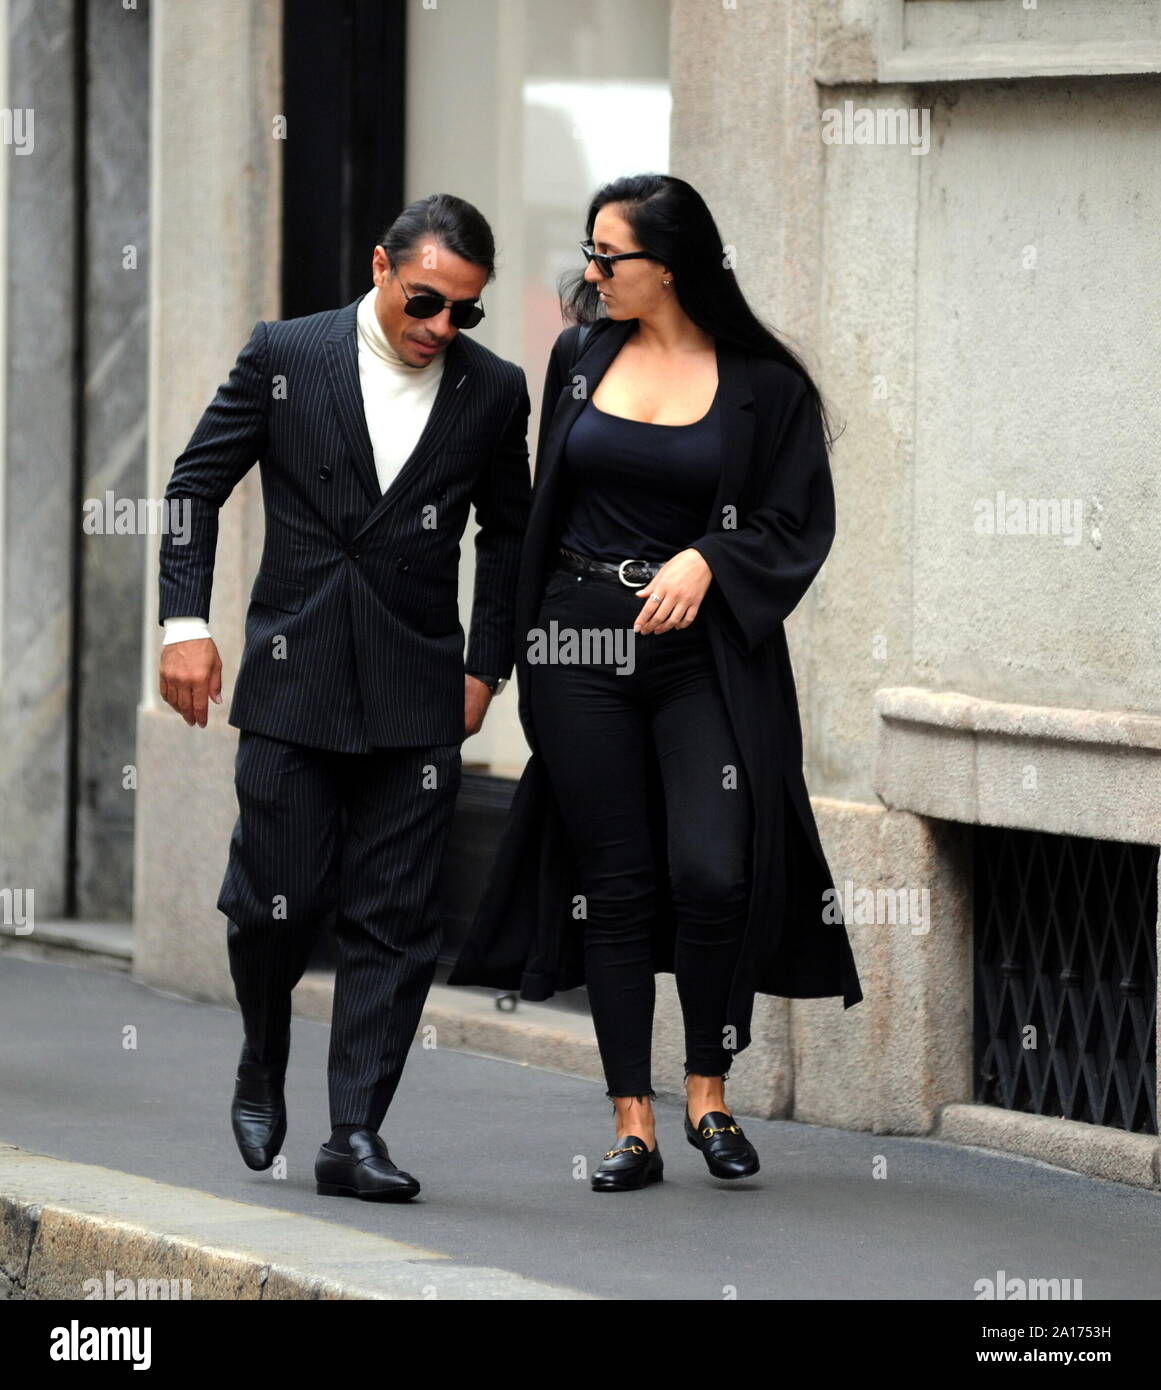 Milan, SALT BAE walking around downtown Salt Bae, the real name of NUSR ET,  a 36-year-old Turkish chef of worldwide renown known and followed by over  23 million followers on INSTAGRAM, has